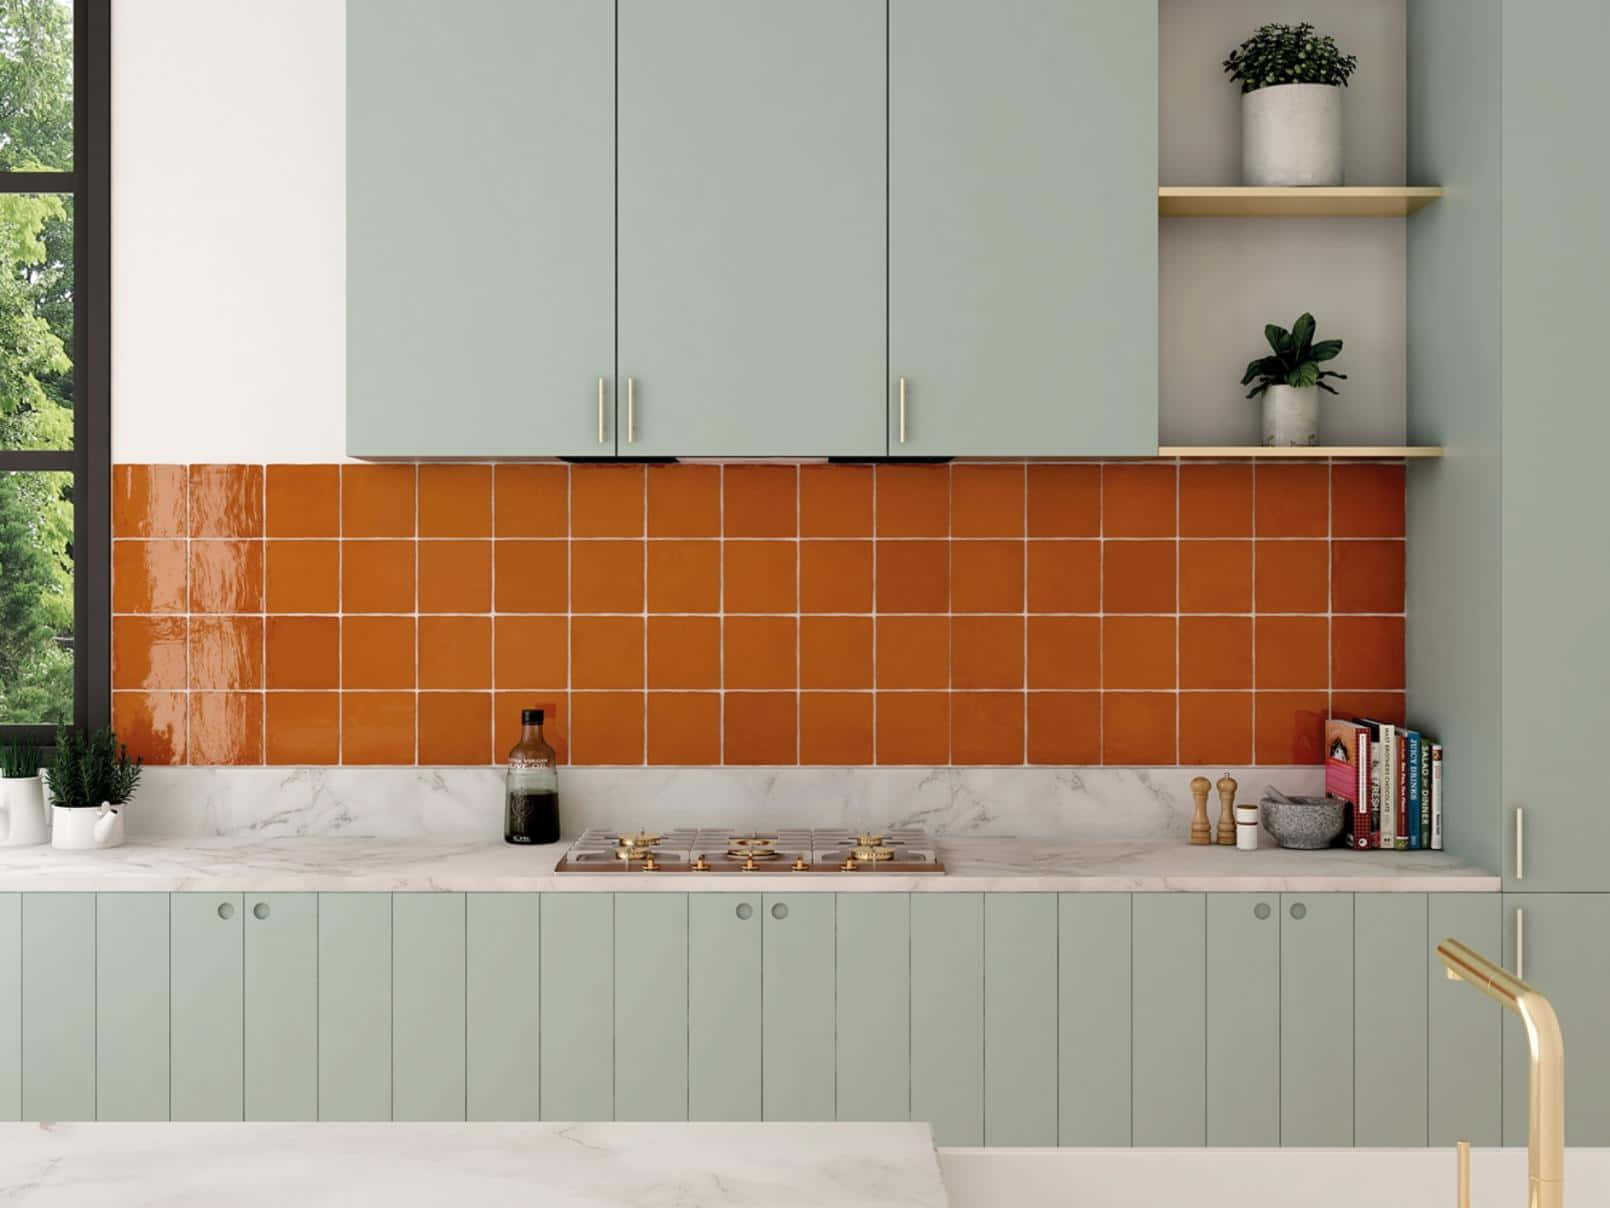 A Kitchen With Orange Tile And Green Cabinets